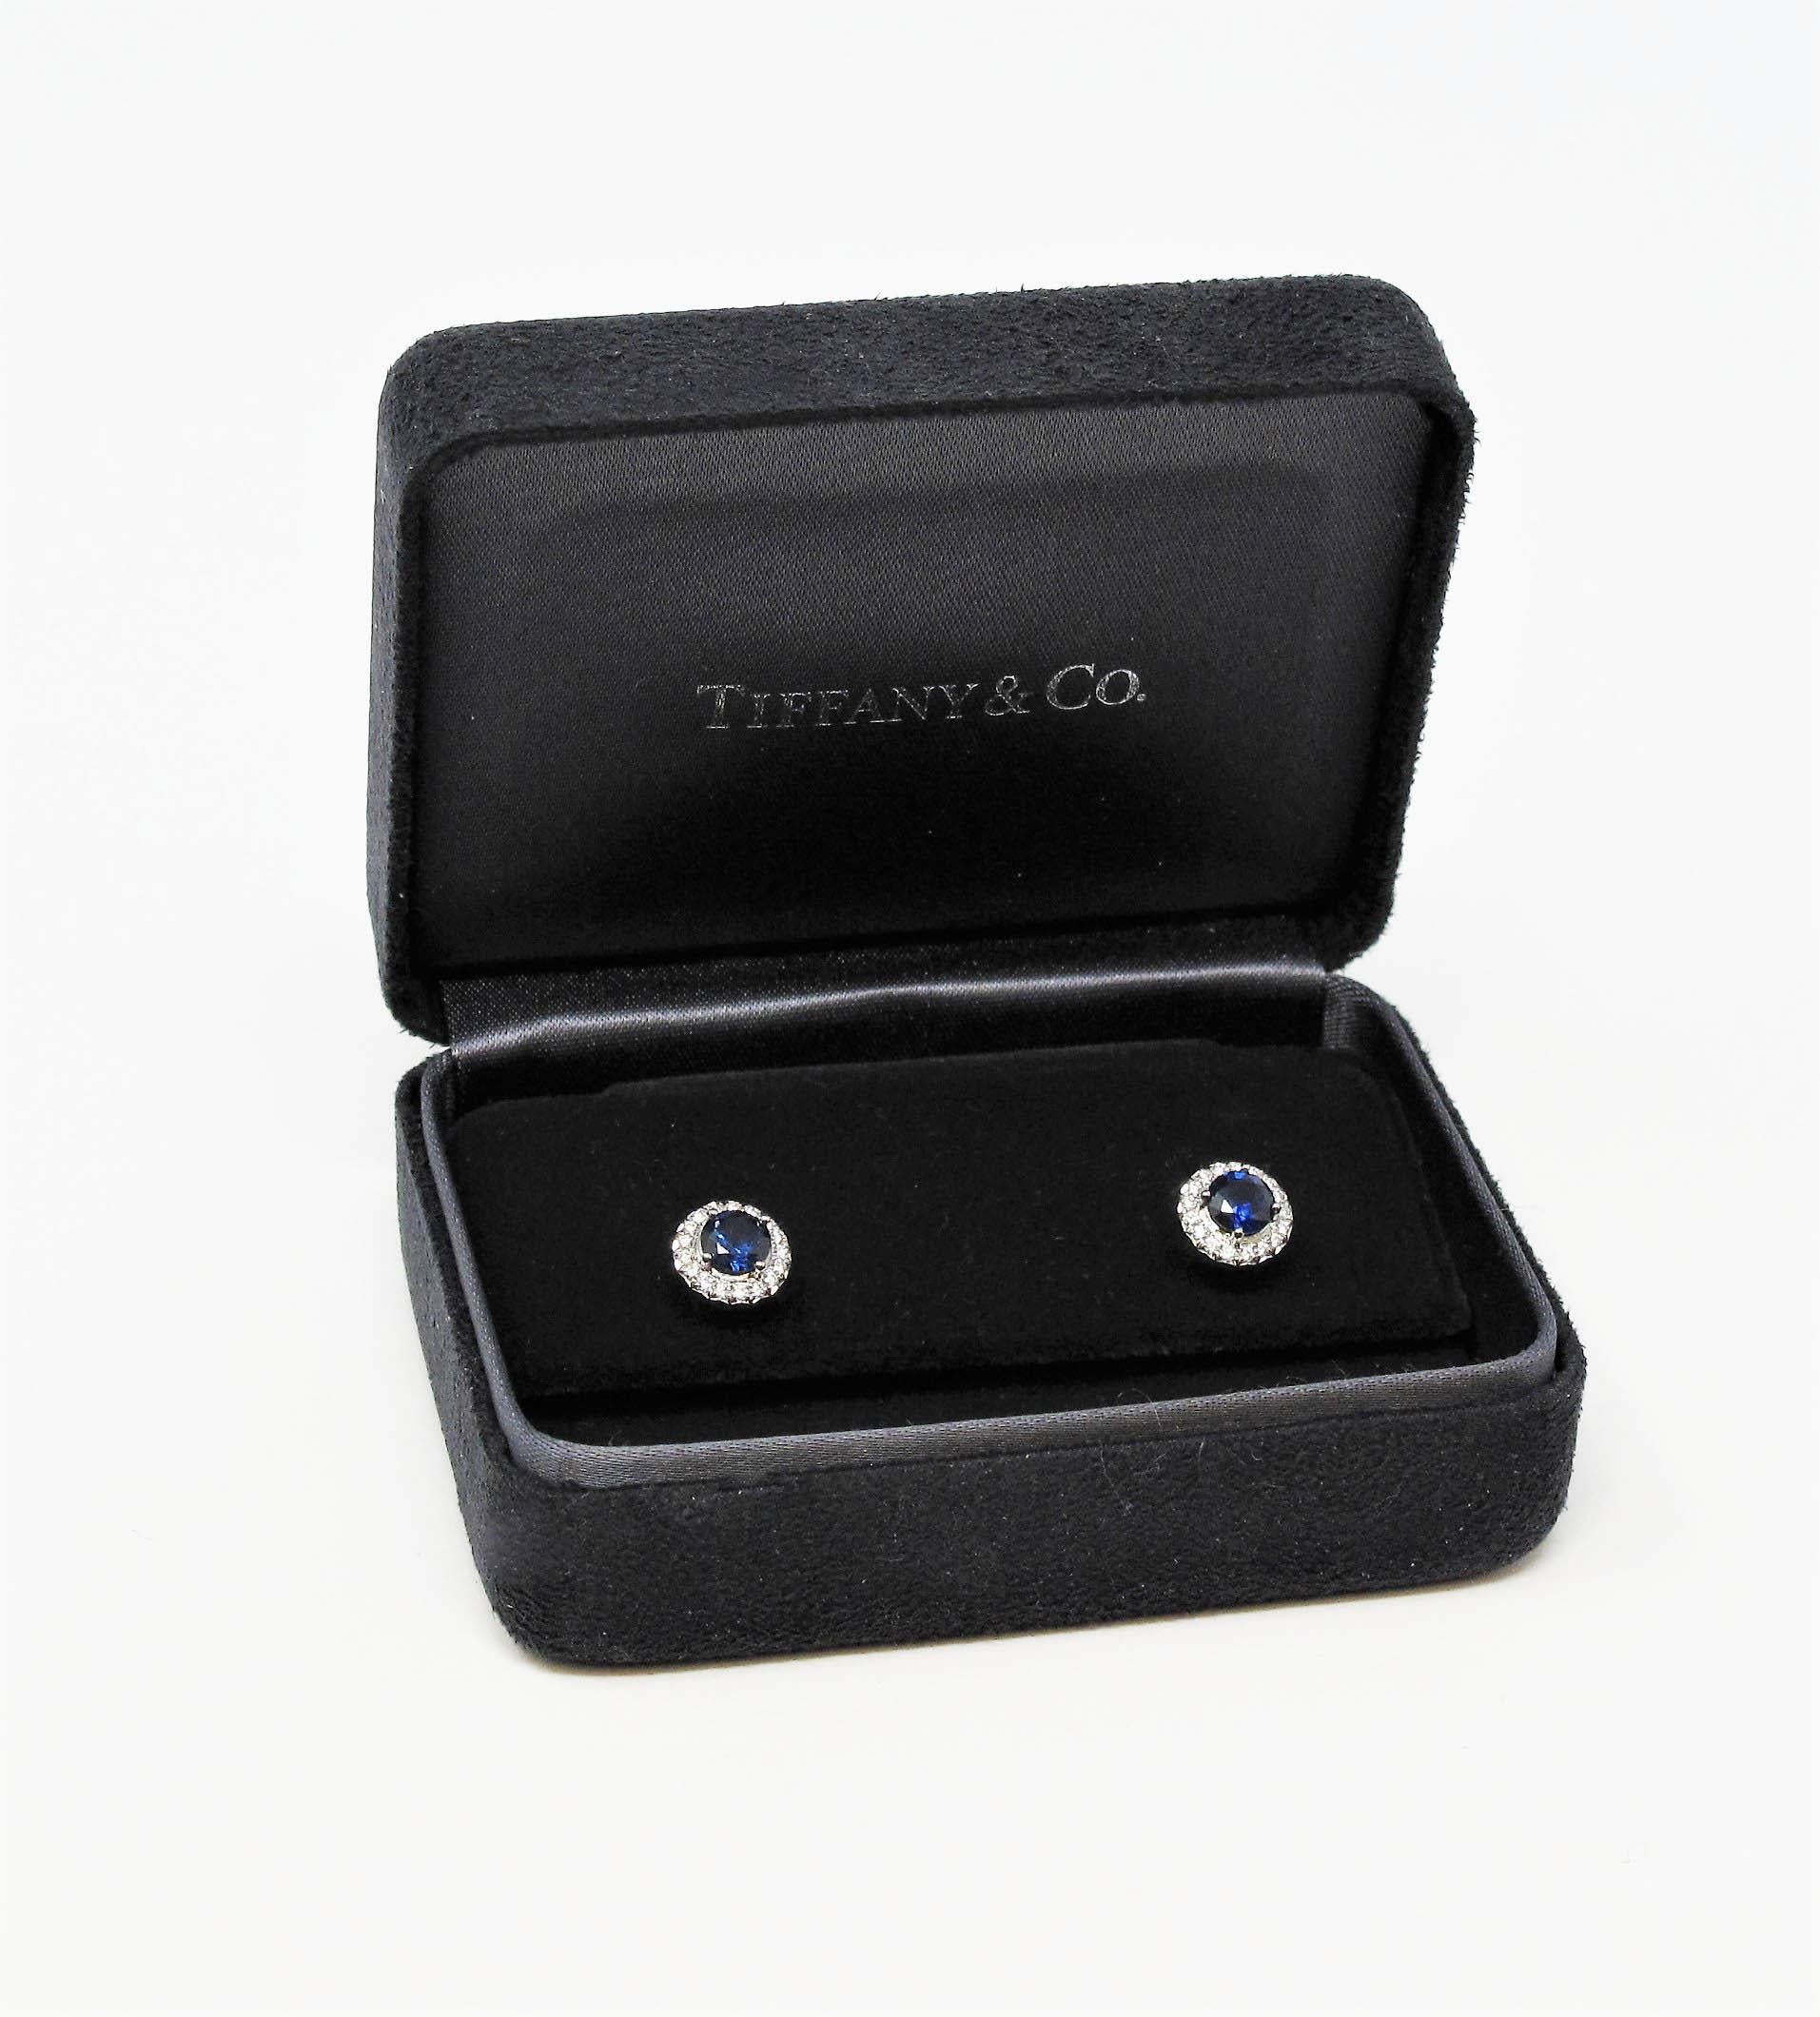 Gorgeous sapphire and diamond stud earrings with a sophisticated modern twist. These gorgeous diamond halo studs offer substantial sparkle and glamour without being over the top, while their simple yet elegant design can be worn with just about